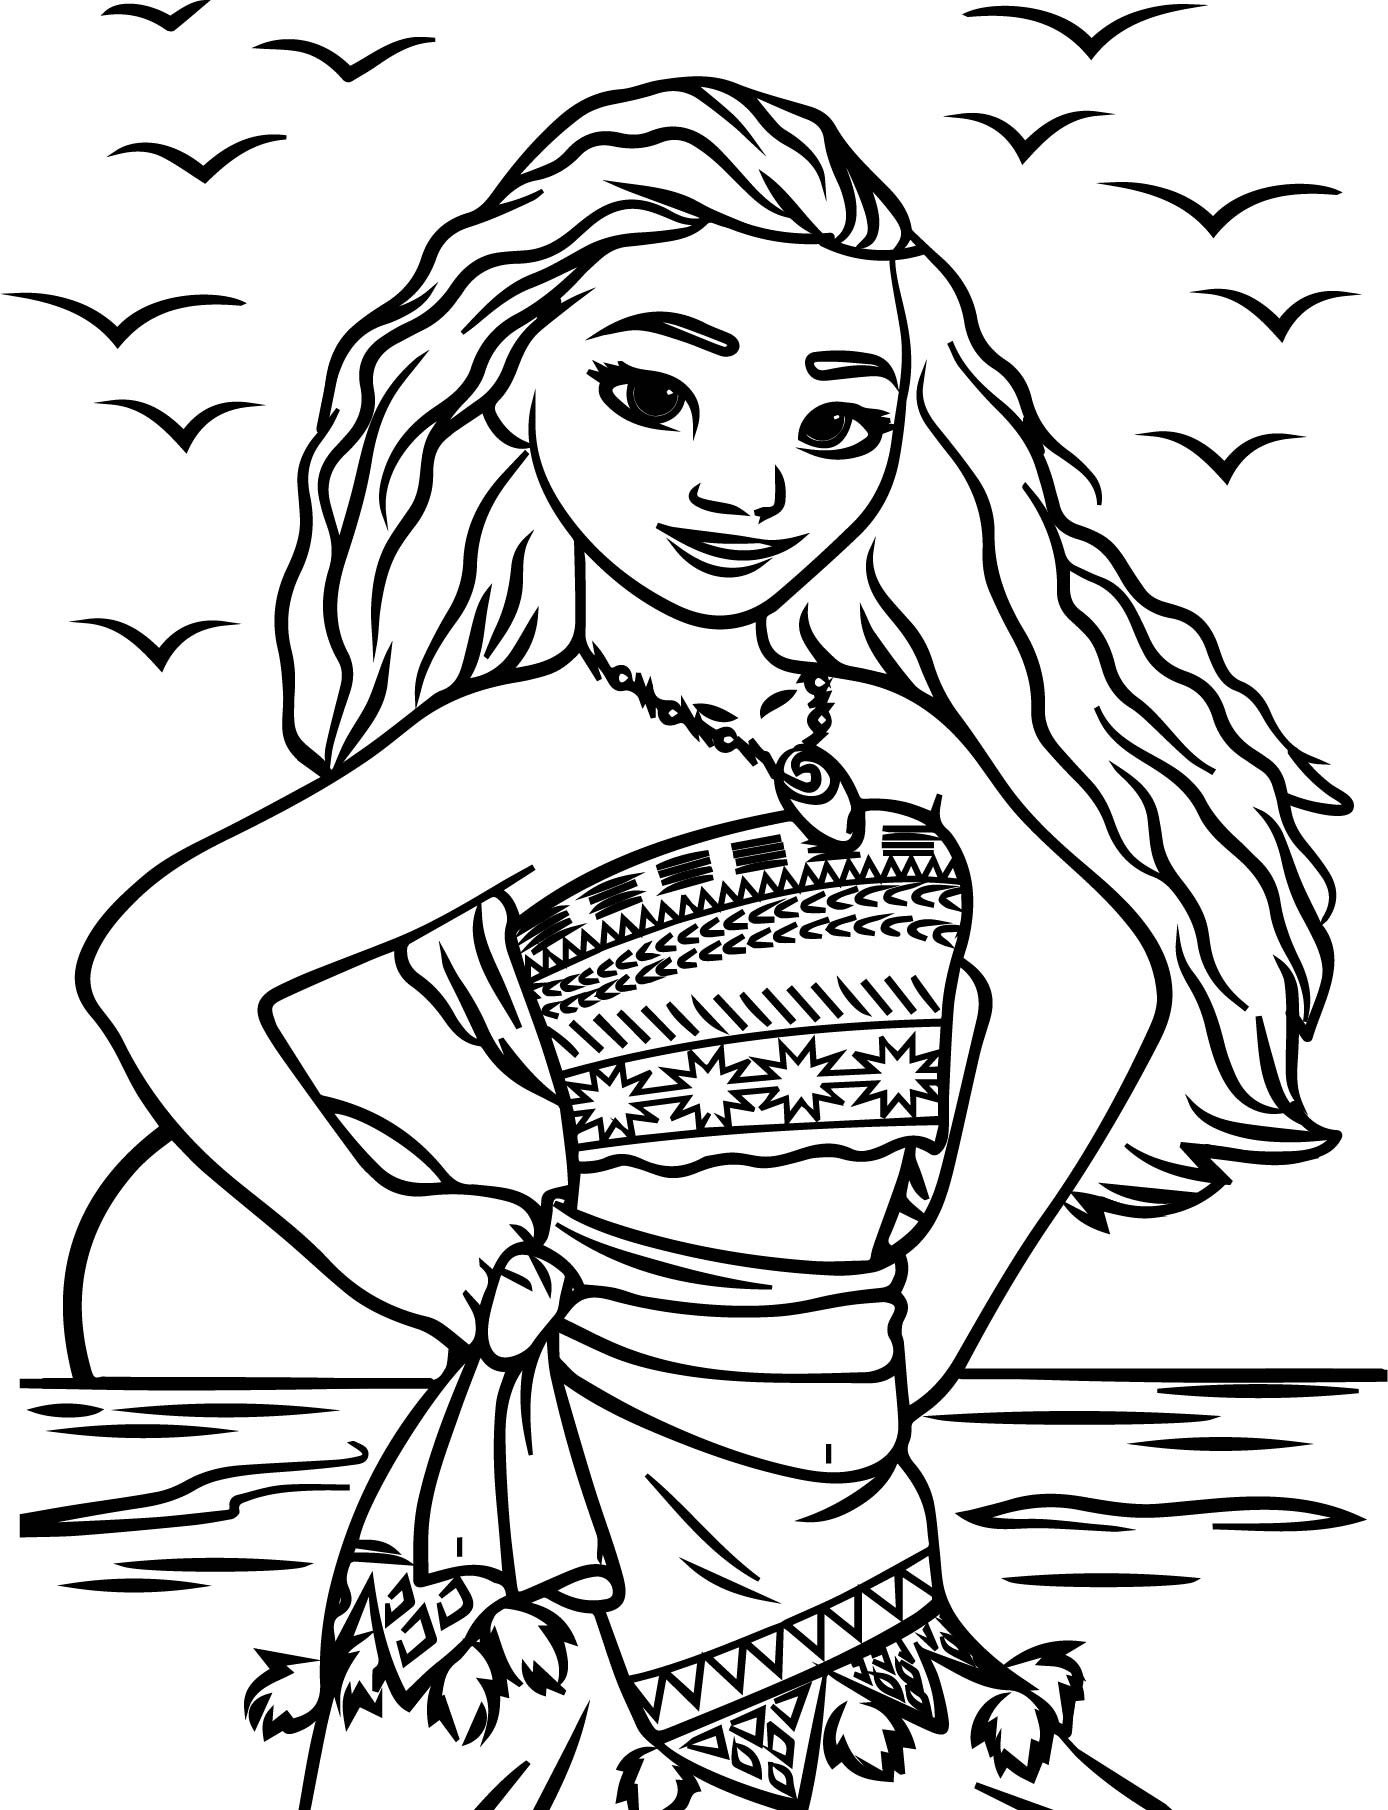 Moana Coloring Pages Printable
 Disney Moana Coloring Page